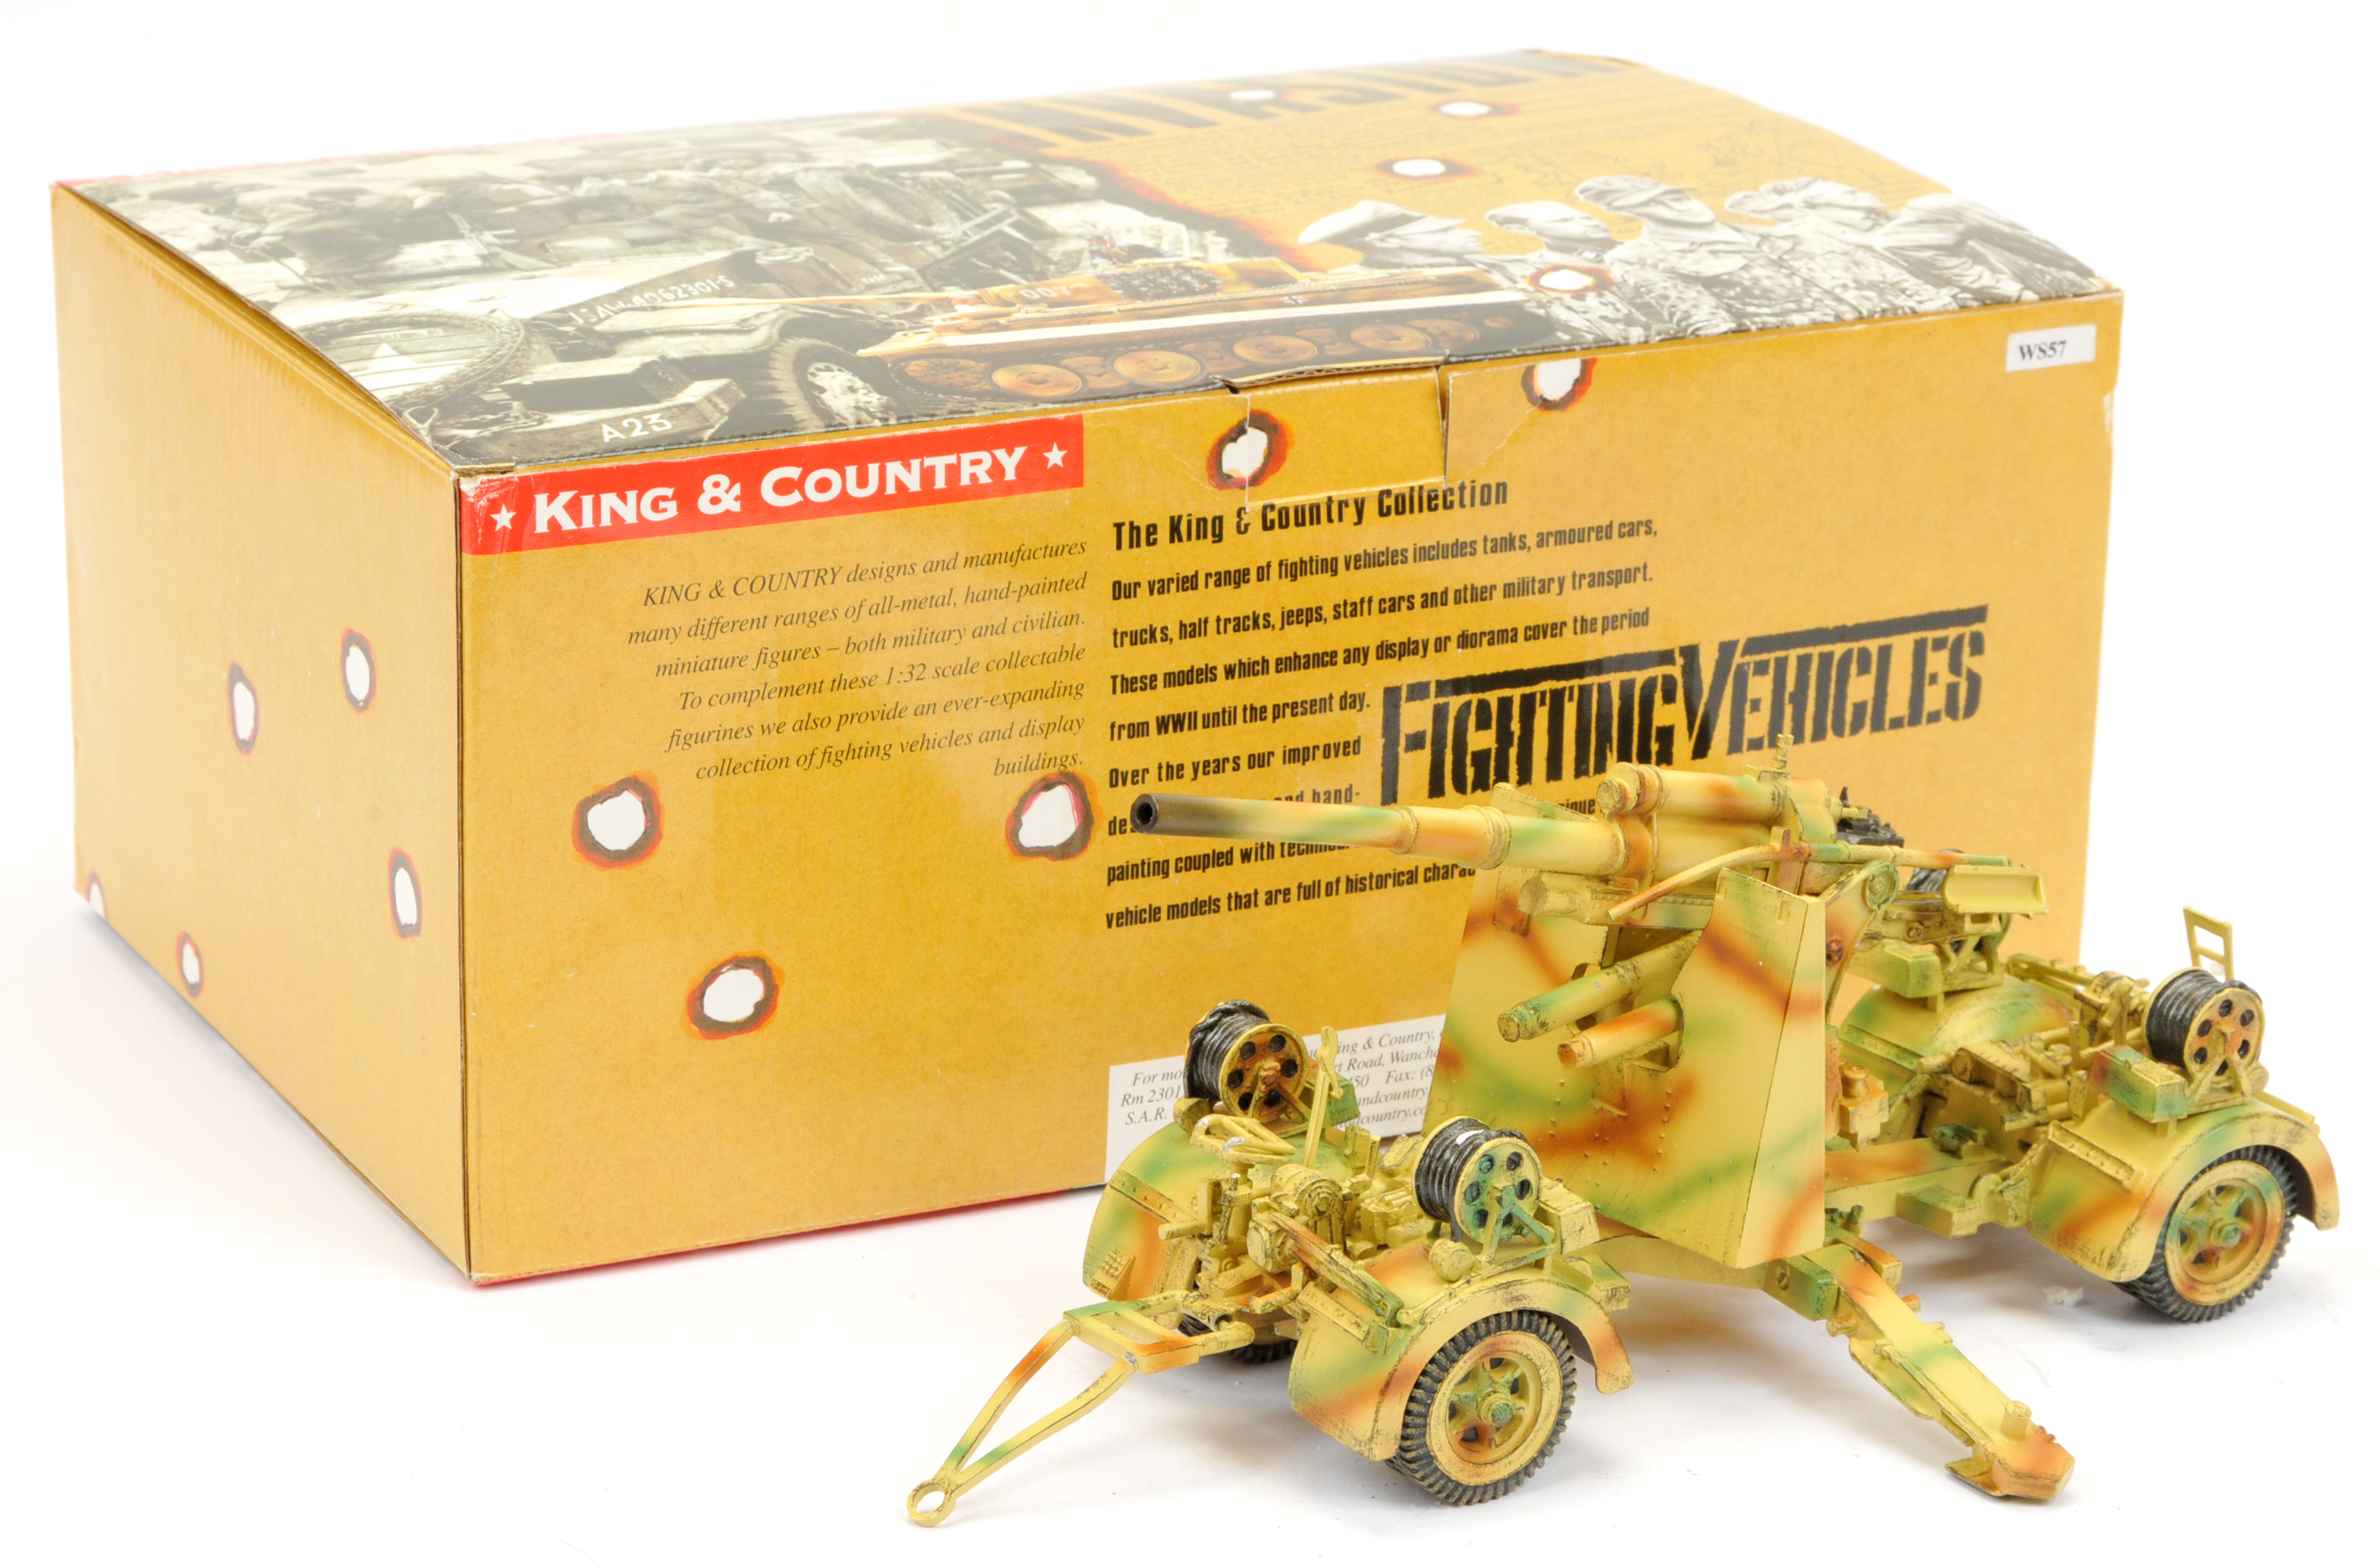 King & Country - Fighting Vehicles: 88mm Gun LE1000 Set WS057